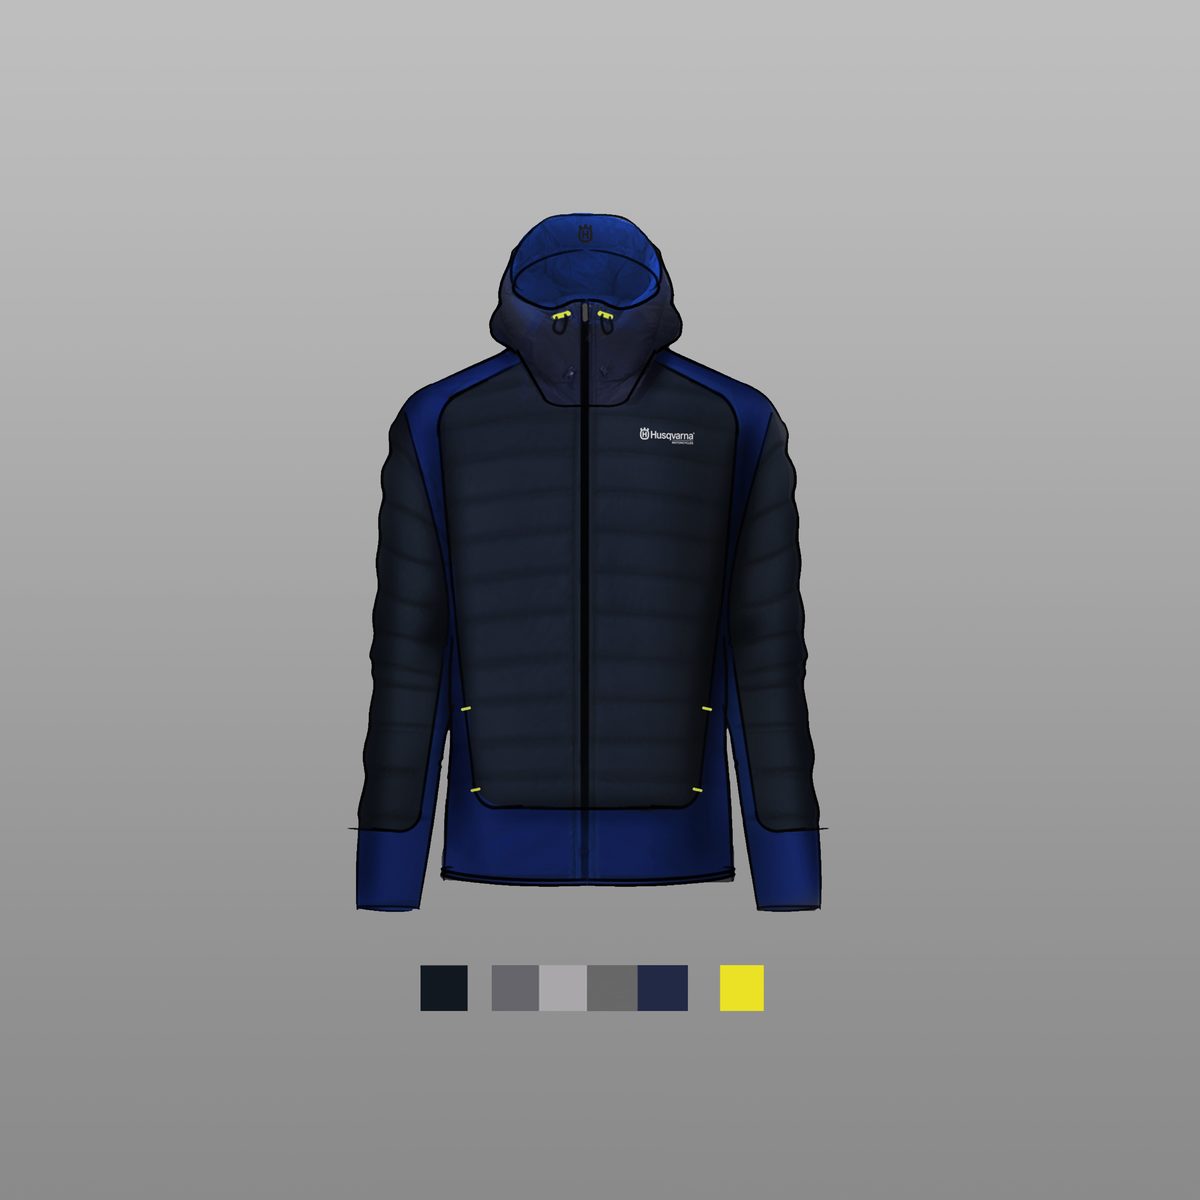 Apparel design and colour palette of jacket from Husqvarna Motorcycles street collection